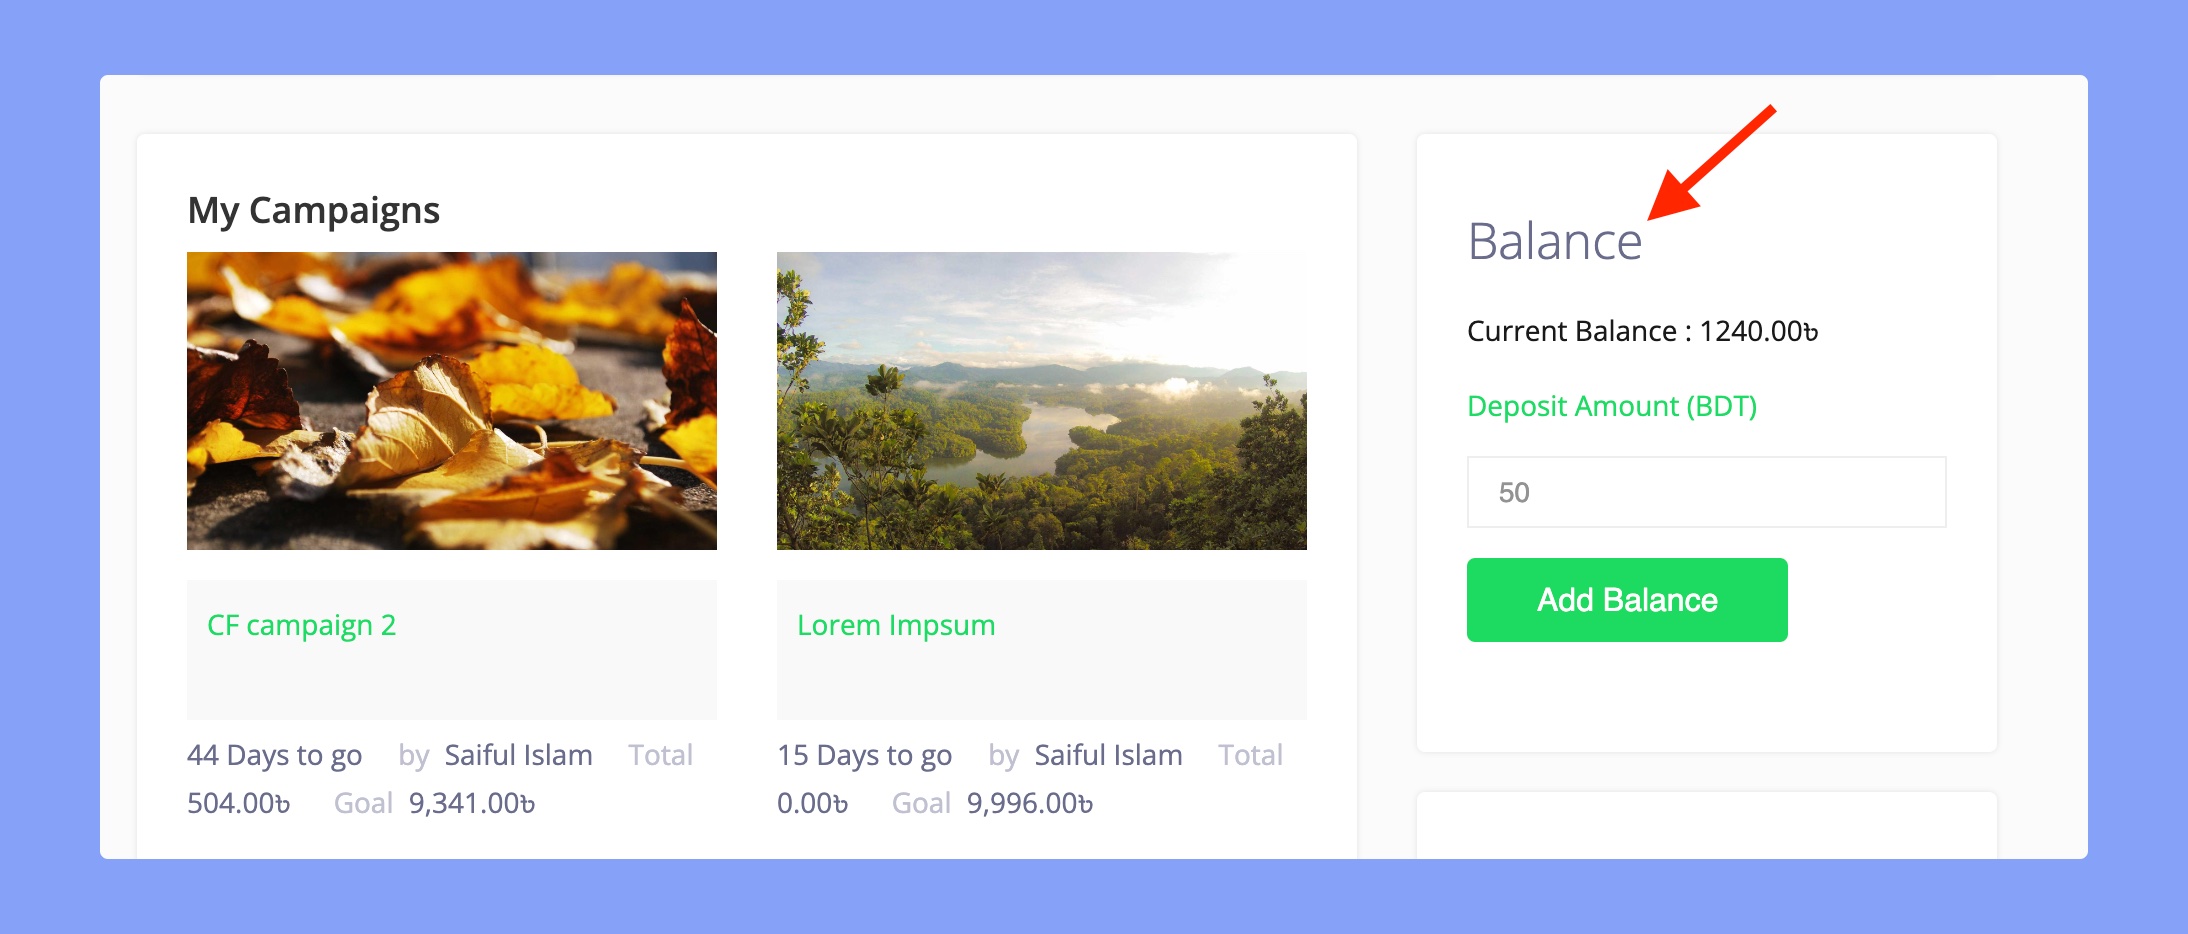 Add balance section in the Crowdfunding dashboard